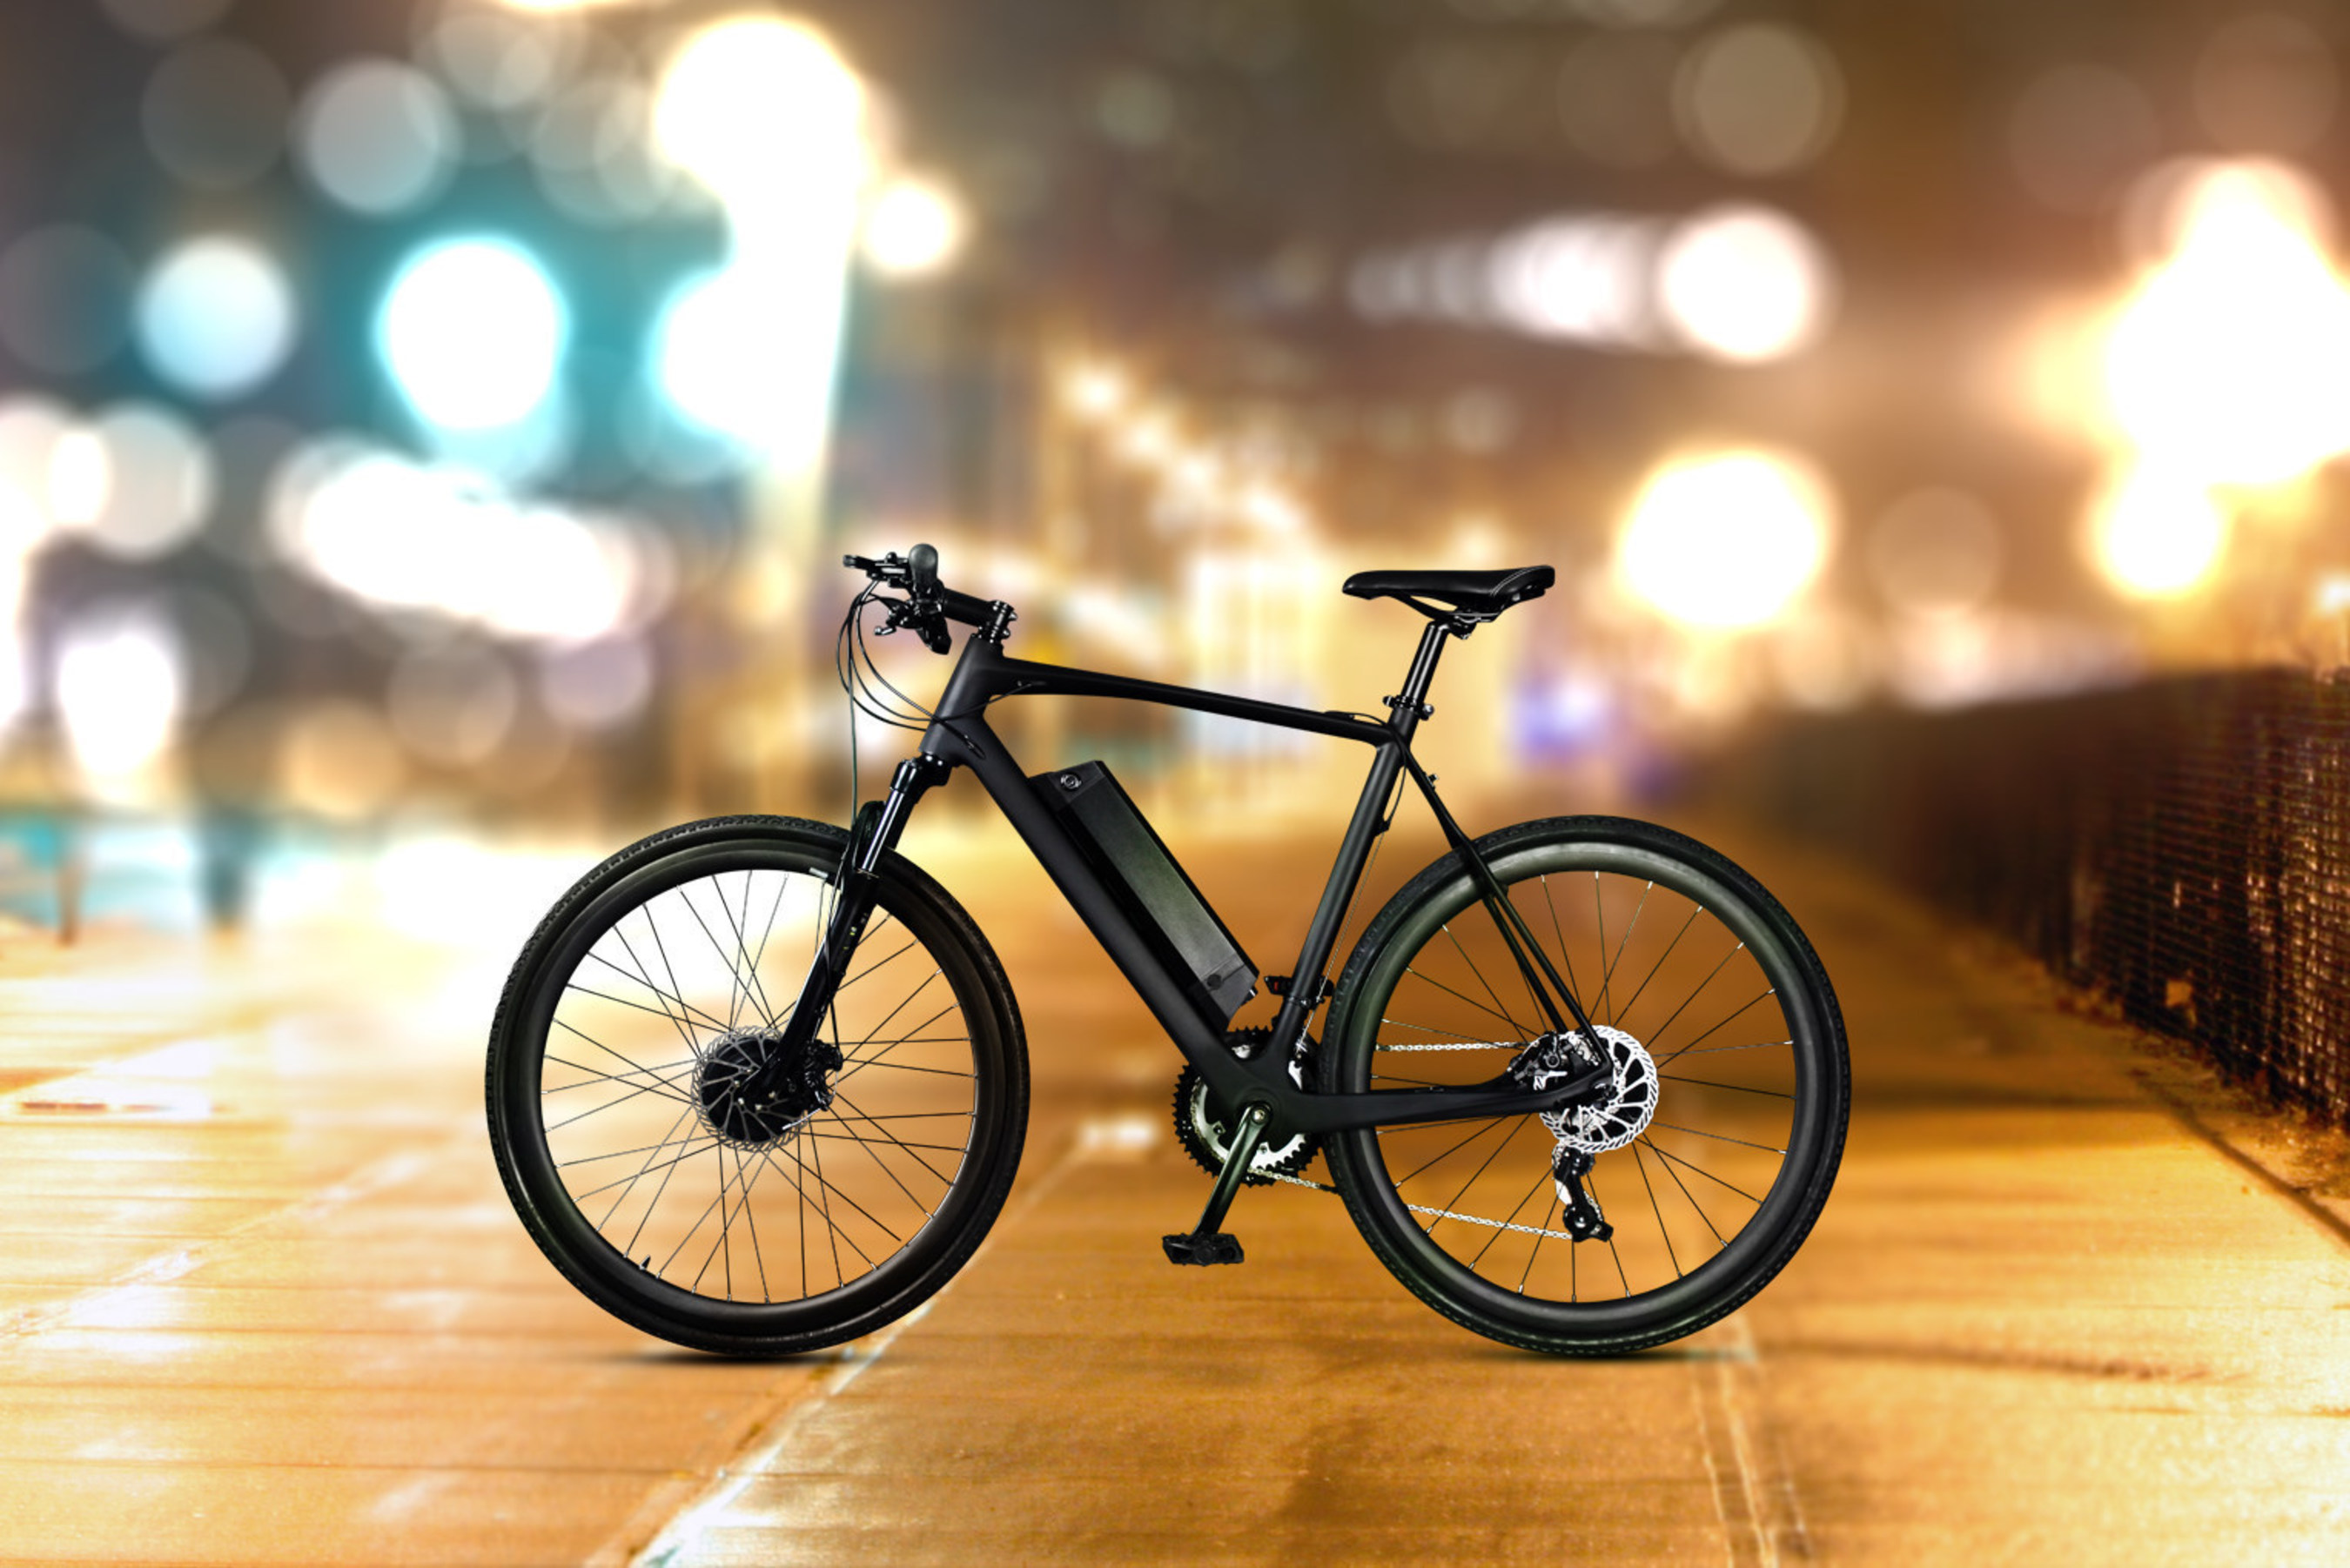 DAYMAK Launches EC1 Carbon Fiber Ebike at EICMA Milan Italy